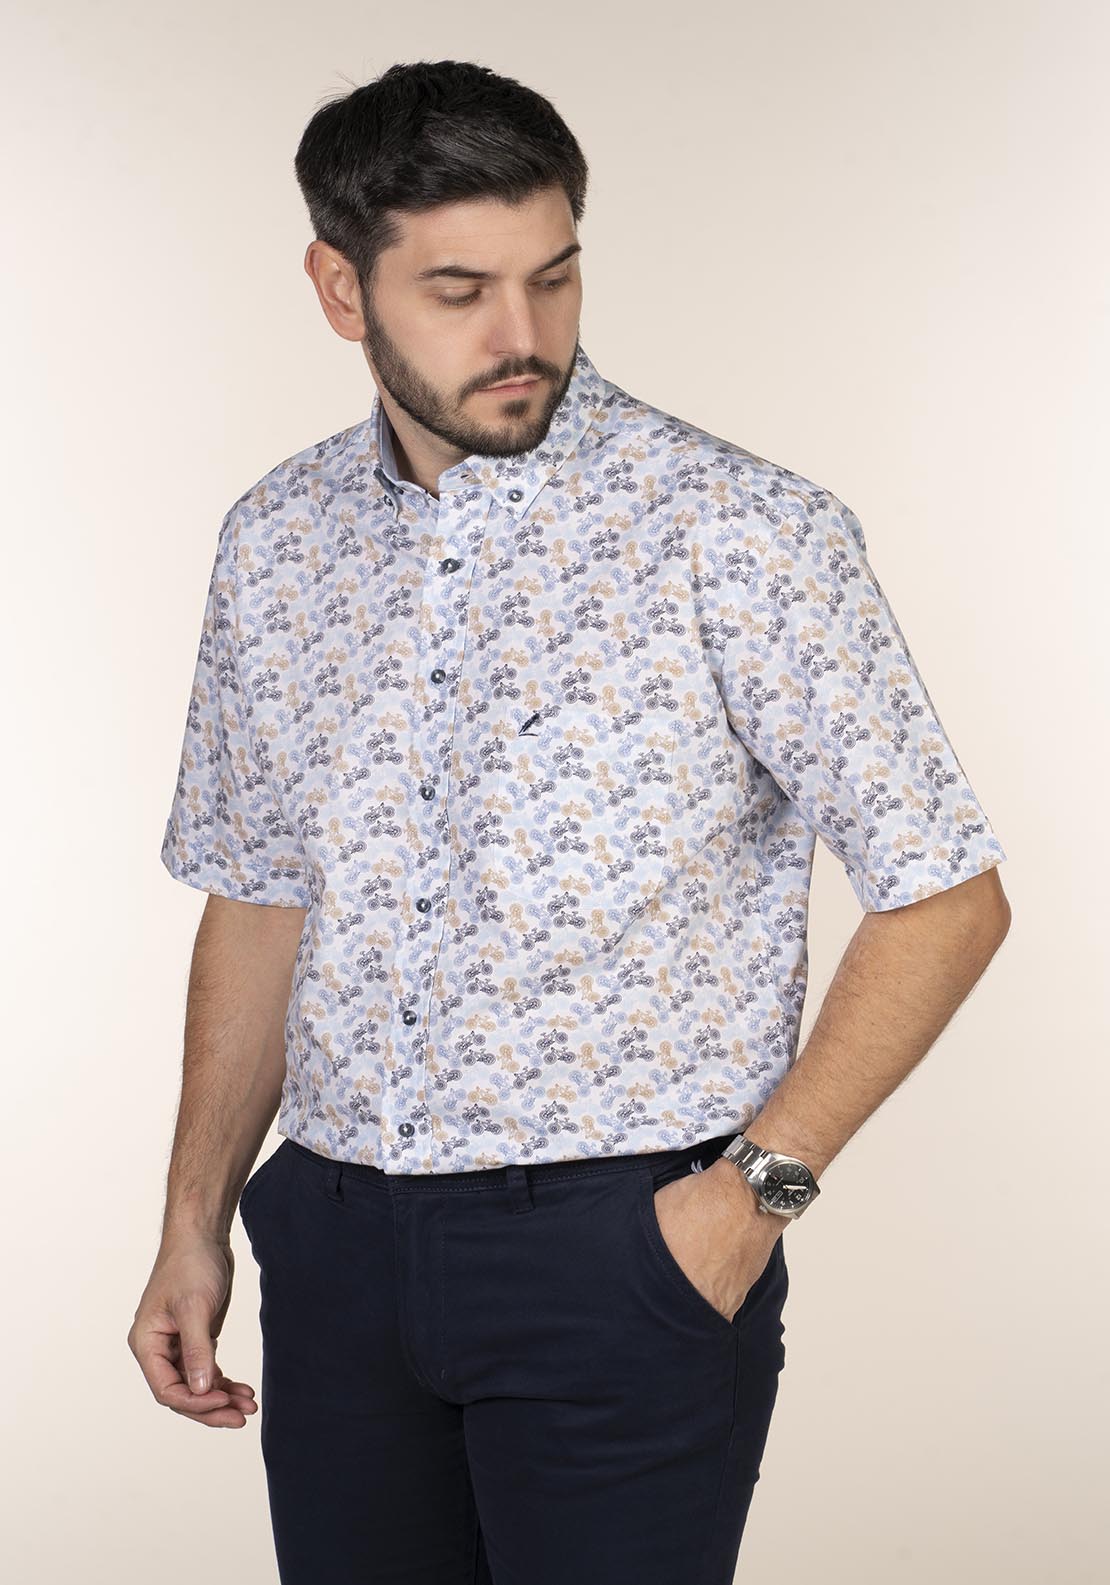 Yeats Casual Patterned Short Sleeve Shirt 4 Shaws Department Stores